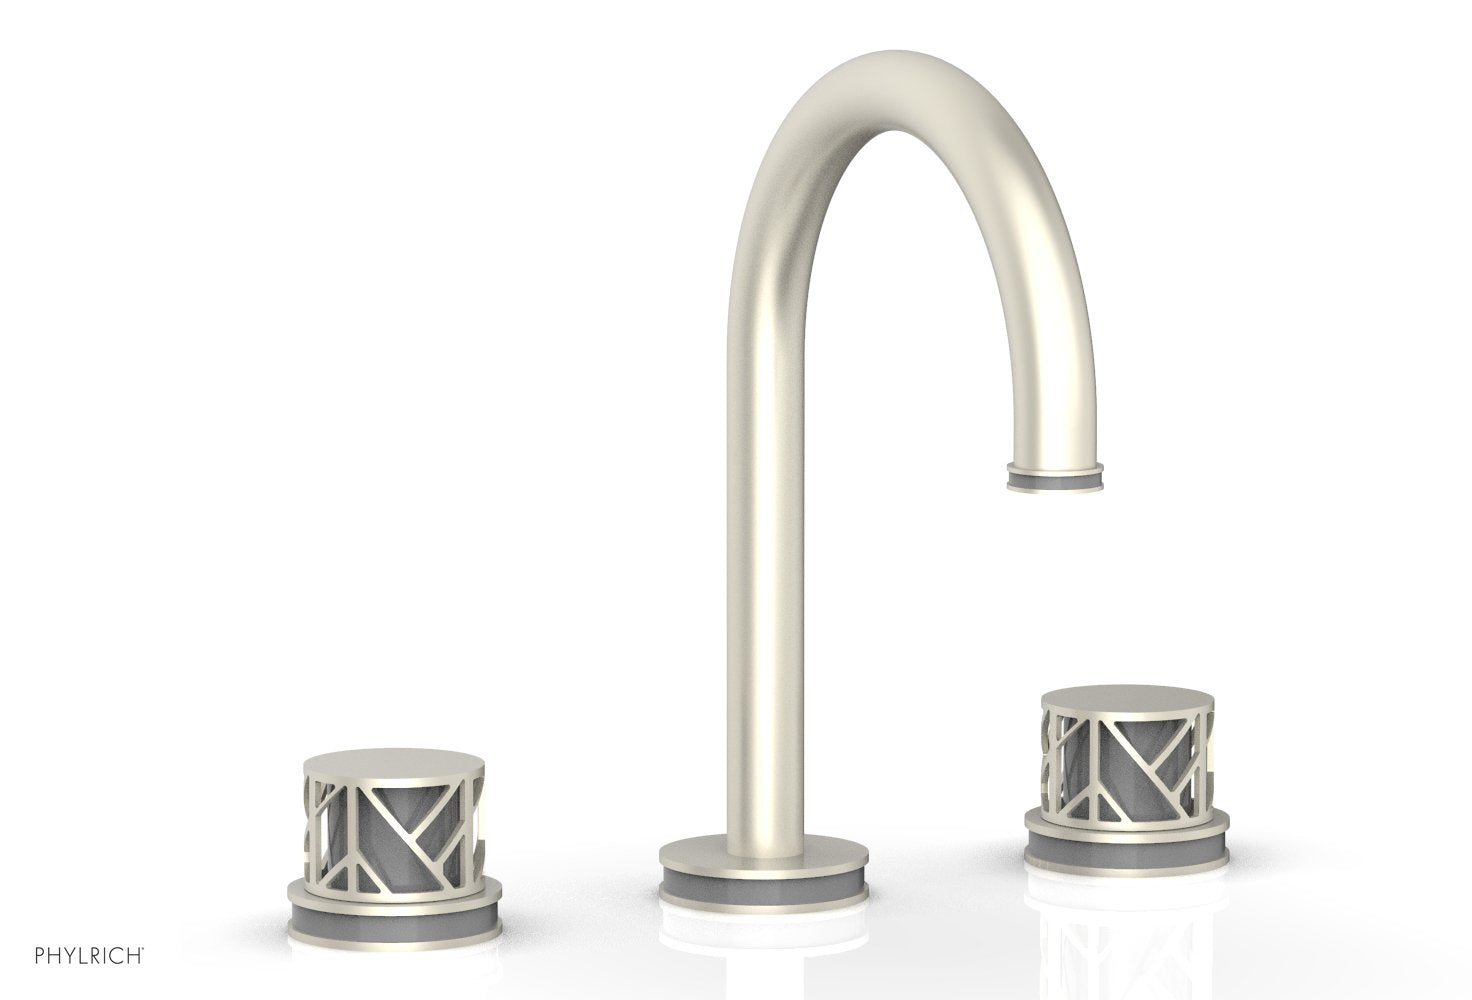 Phylrich JOLIE Widespread Faucet - Round Handles with "Grey" Accents